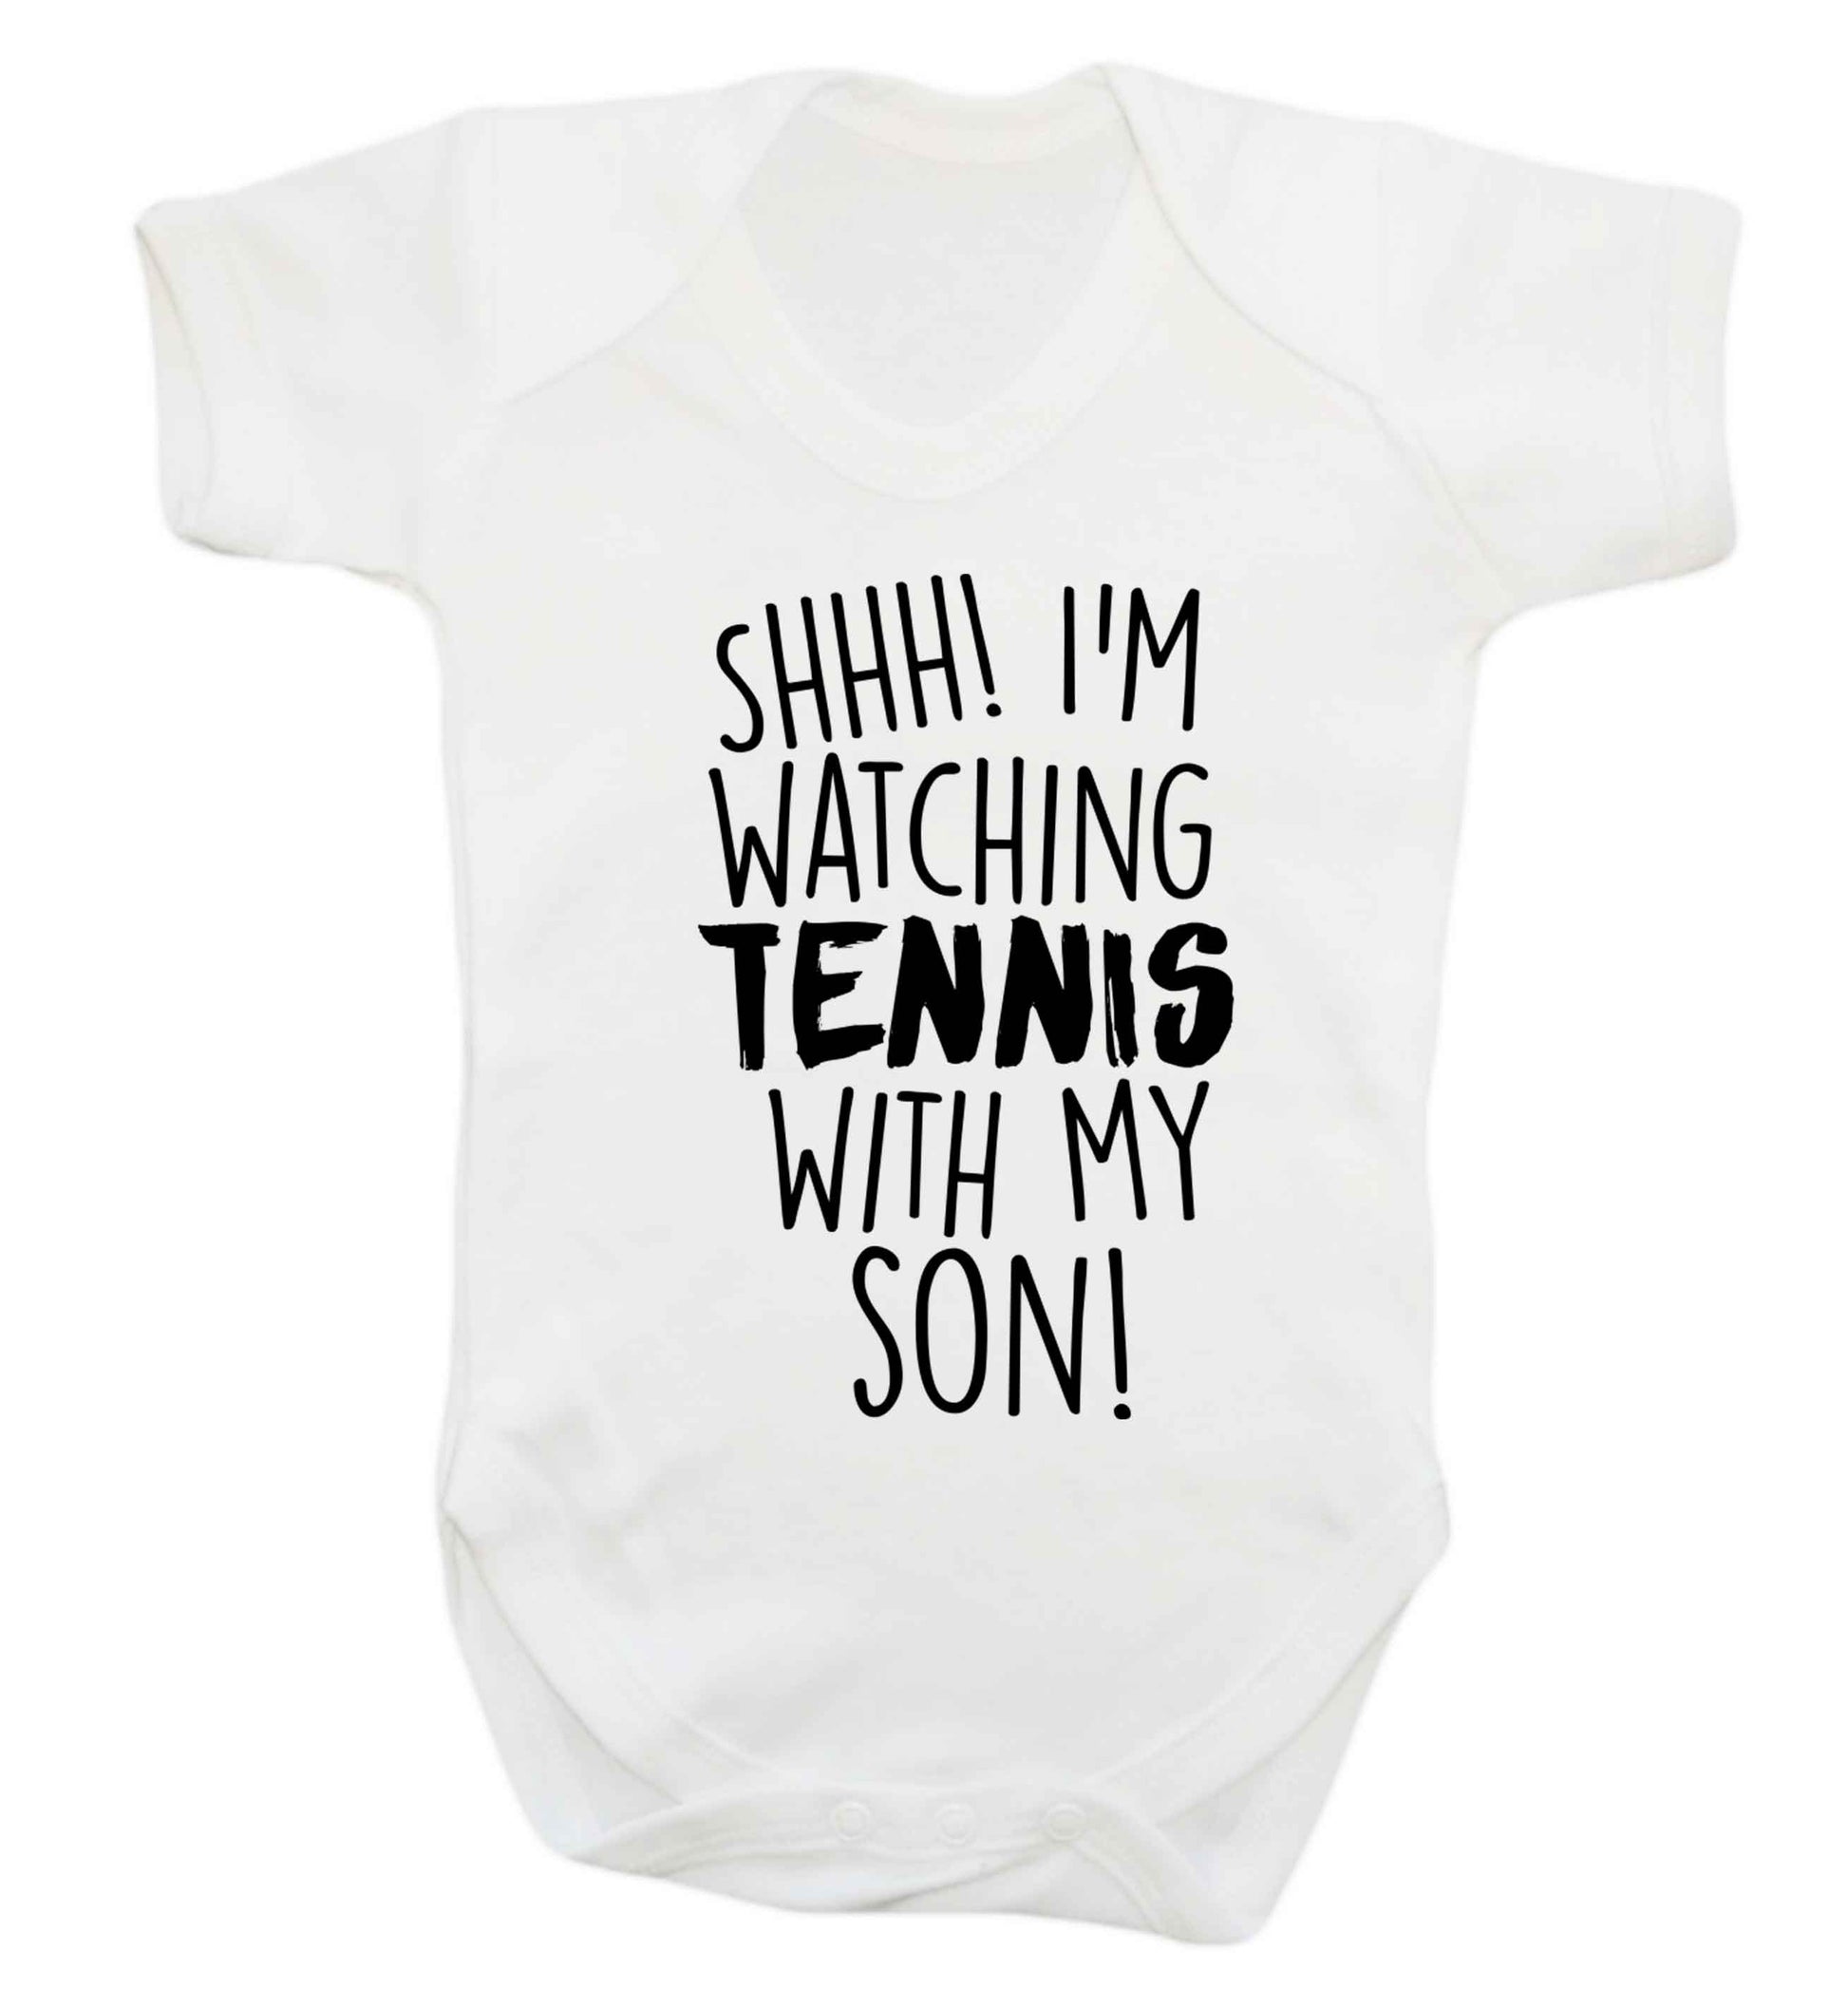 Shh! I'm watching tennis with my son! Baby Vest white 18-24 months